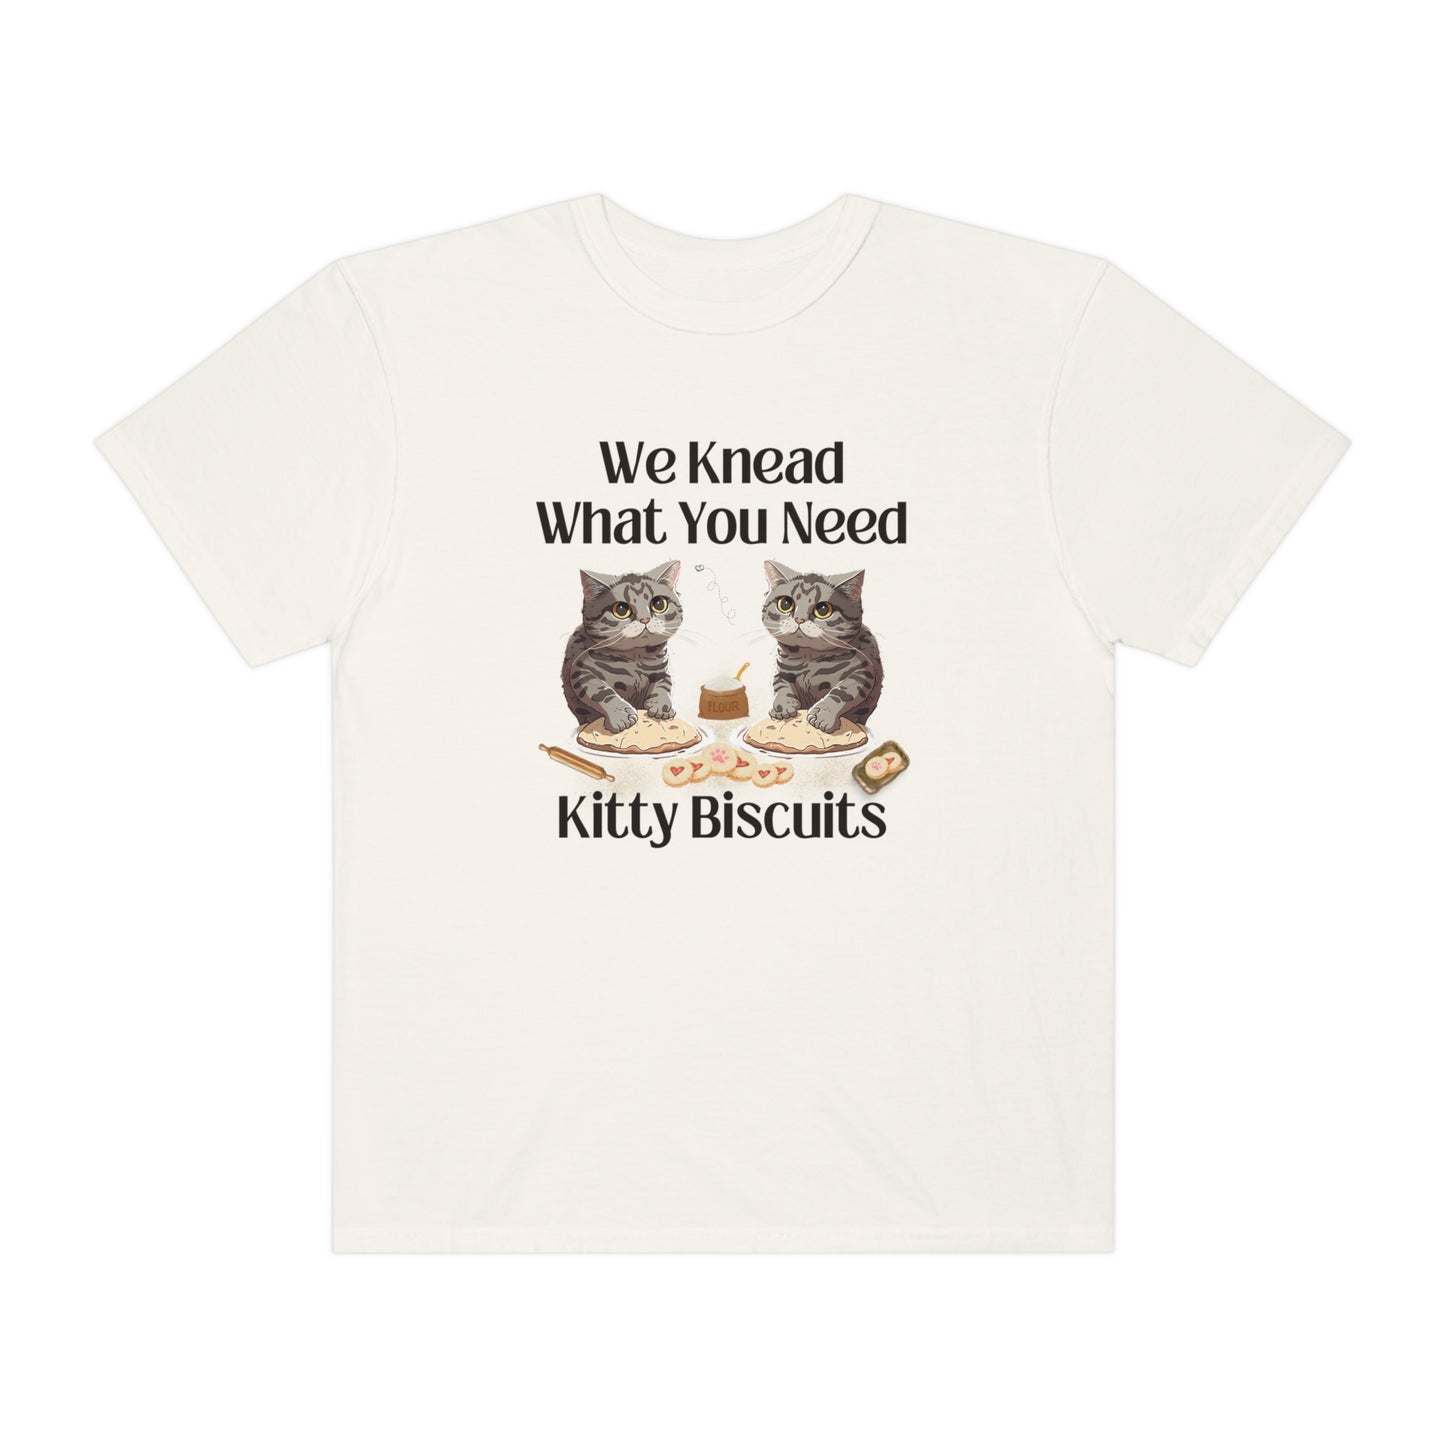 Kitty Biscuits Shirt for Cat Lovers